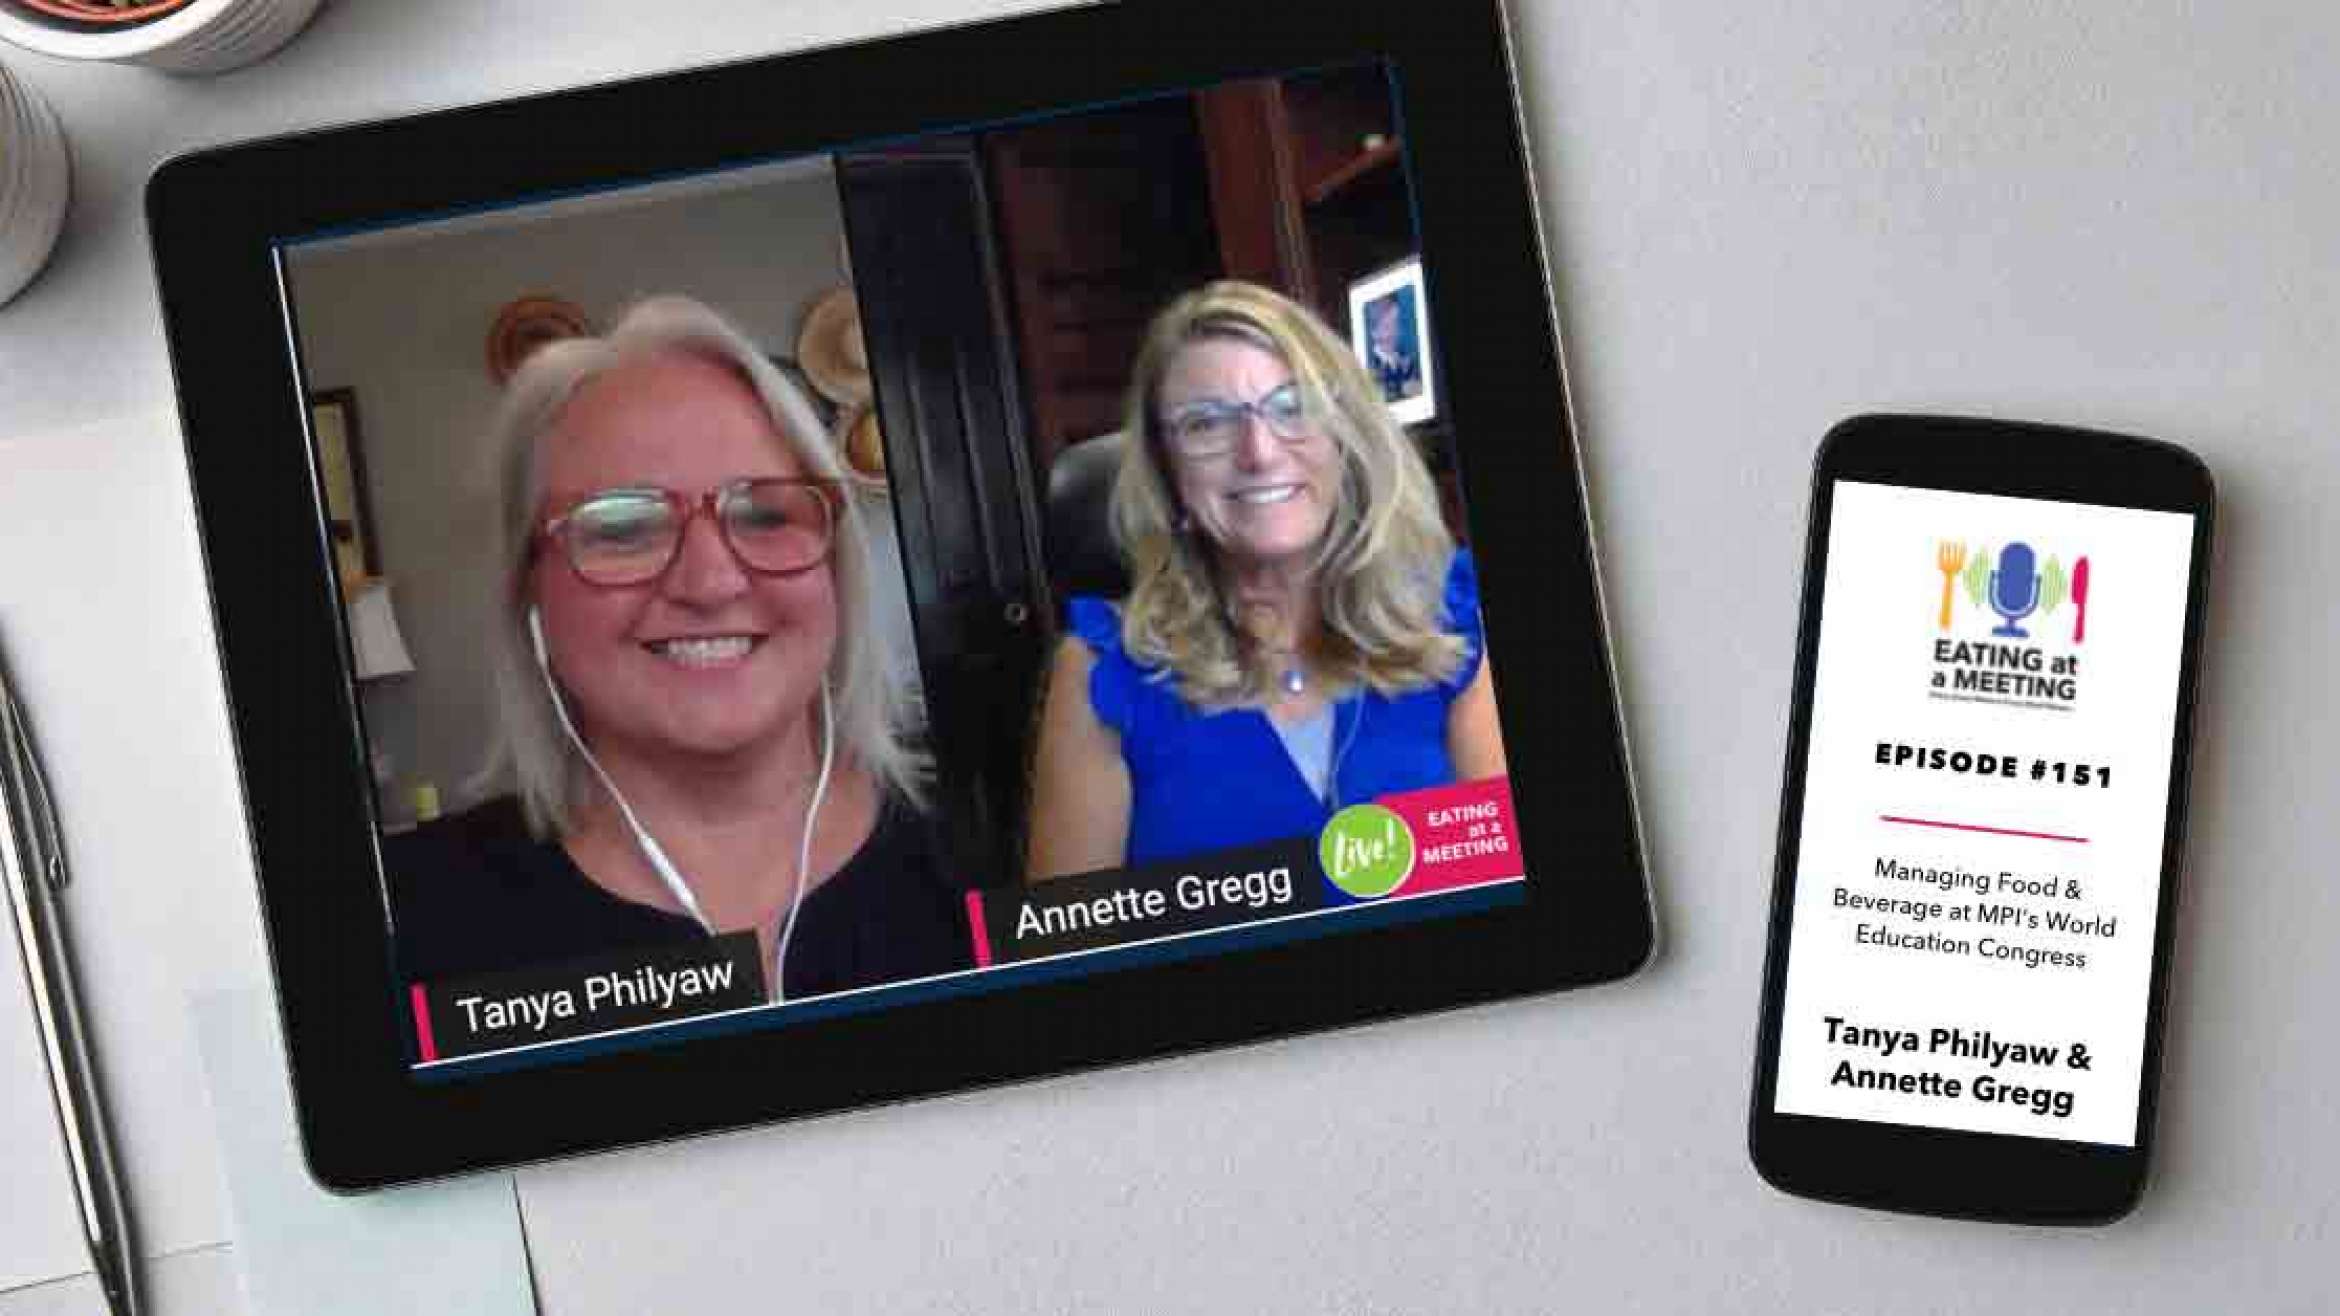 An iPad and iPhone on a table. On the iPad is a picture of a woman who are on video screen. On the iphone is the Eating at a Meeting podcast logo with Episode #151 Managing Food & Beverage at MPI's World Education Congress Tanya Philyaw & Annette Gregg WEC